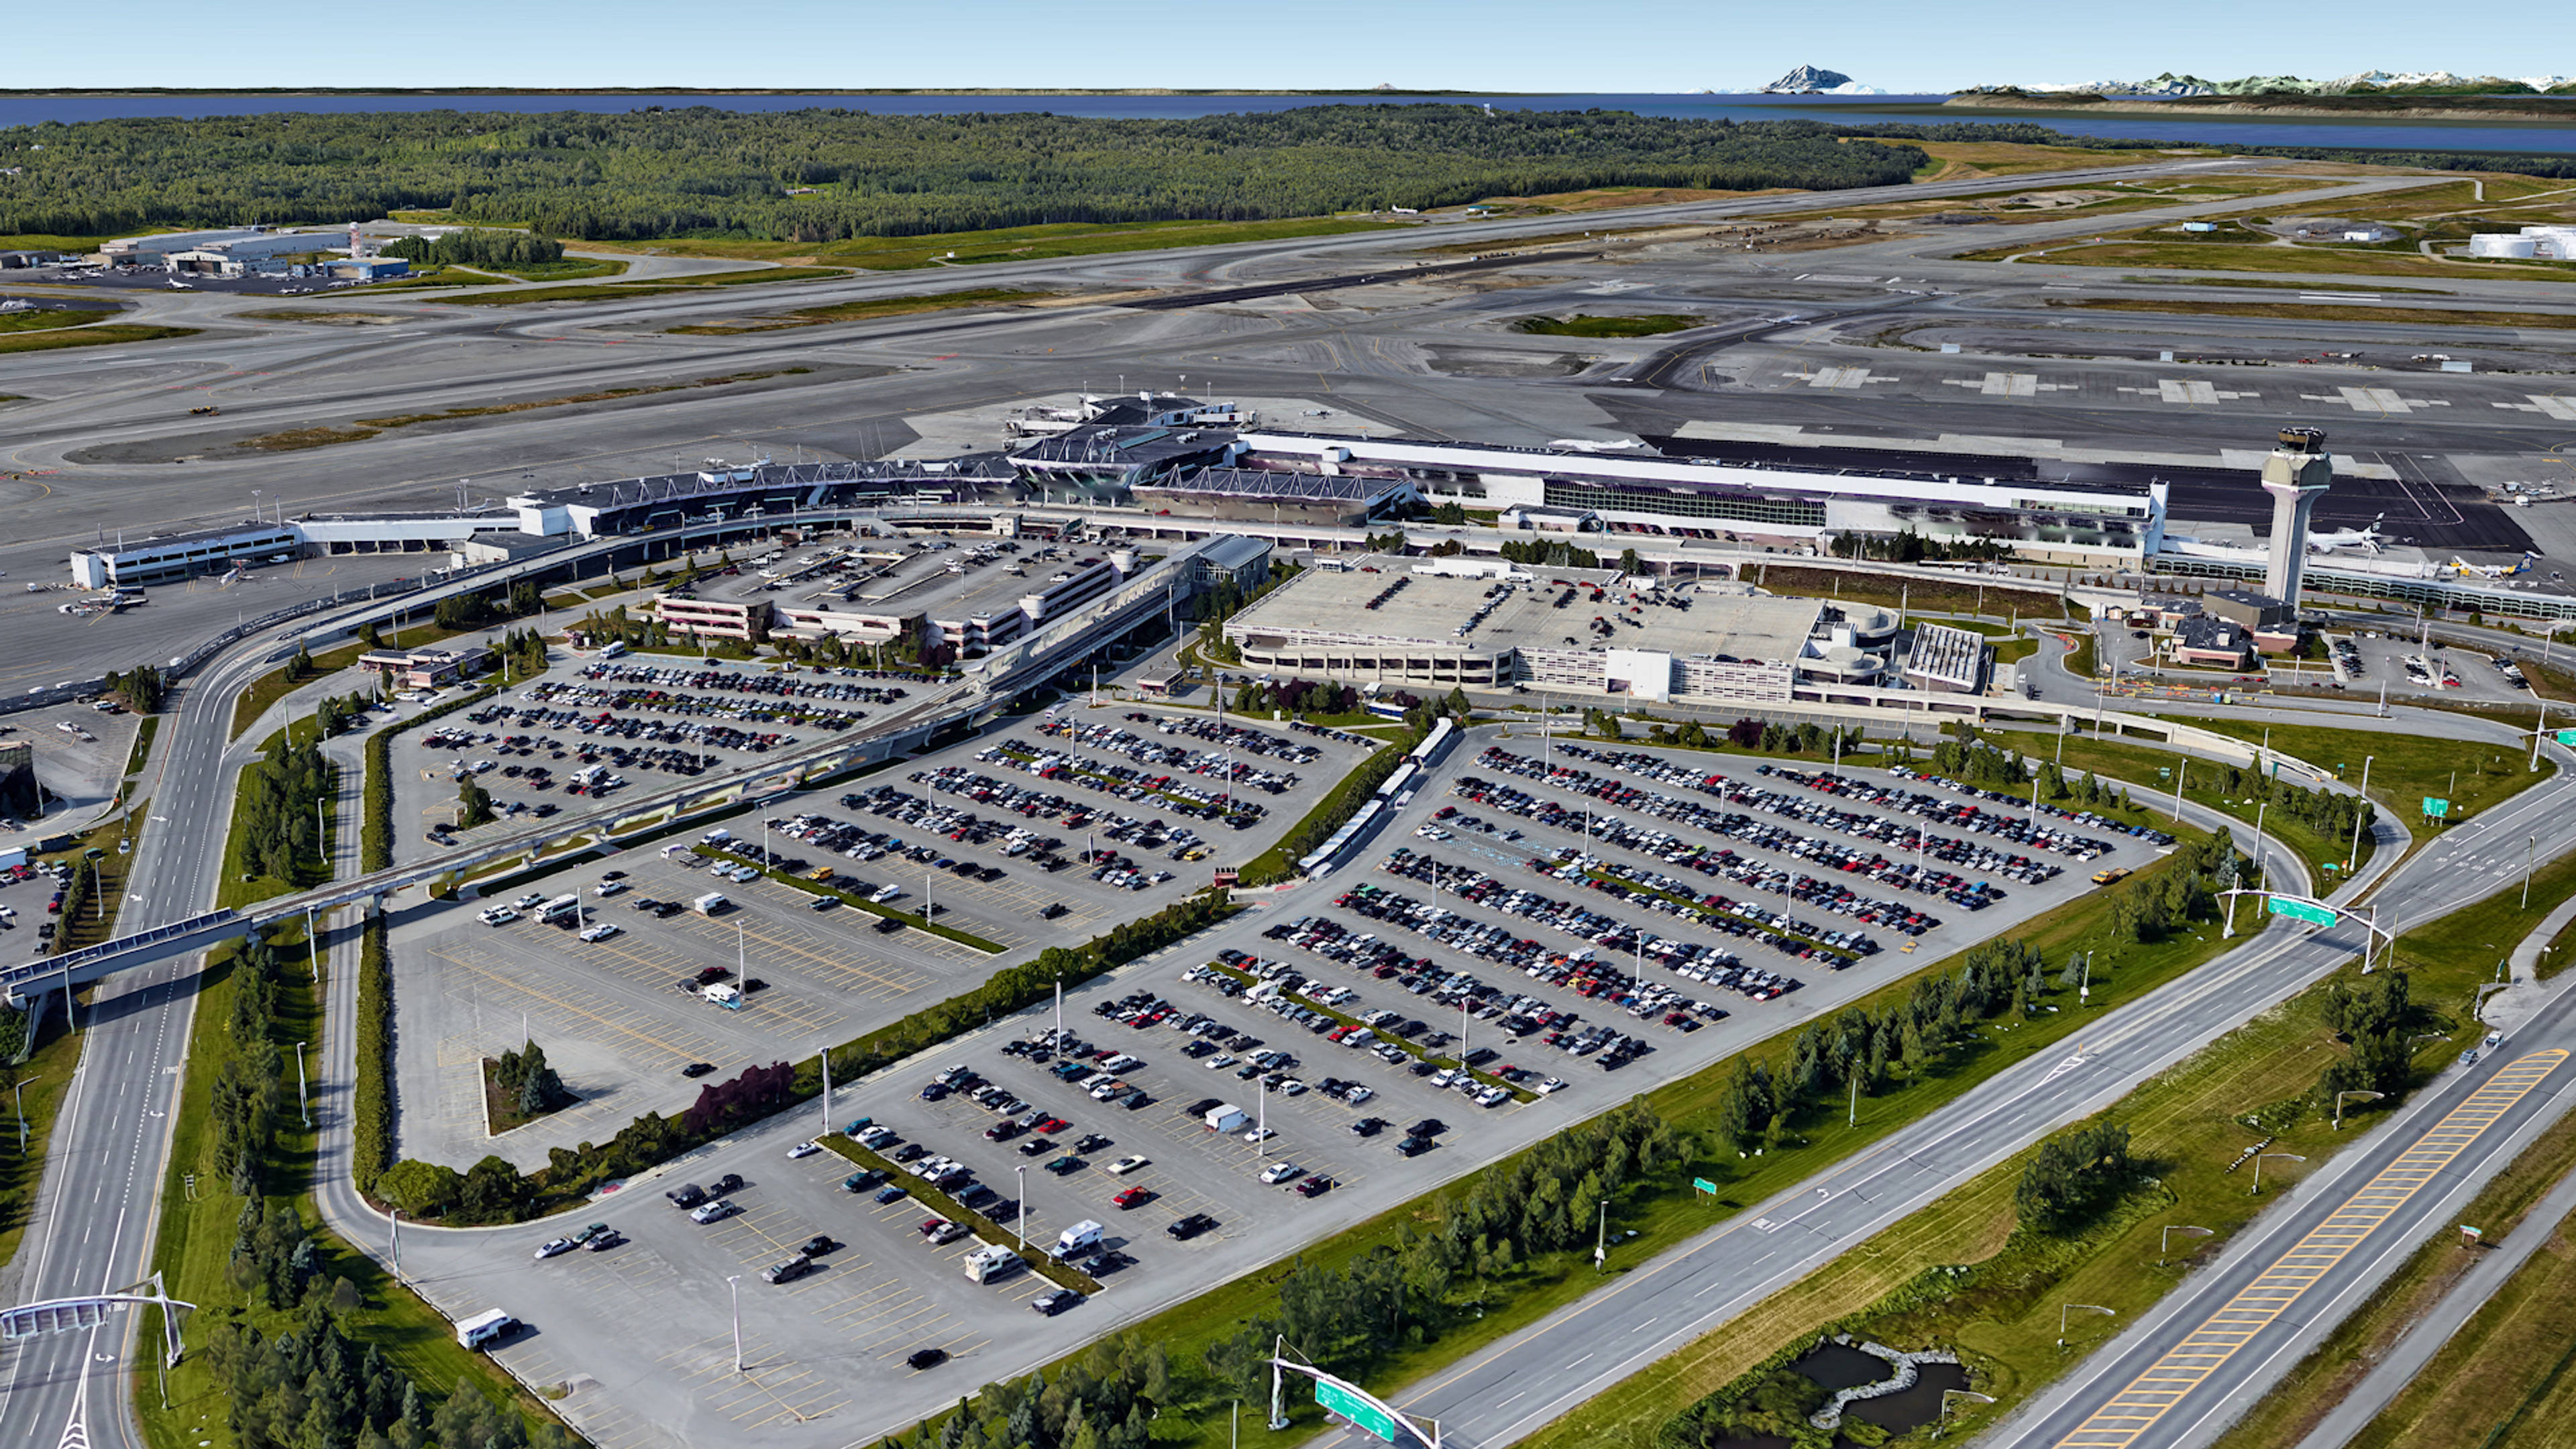 Aerial View of Ted Stevens Anchorage Airport Parking